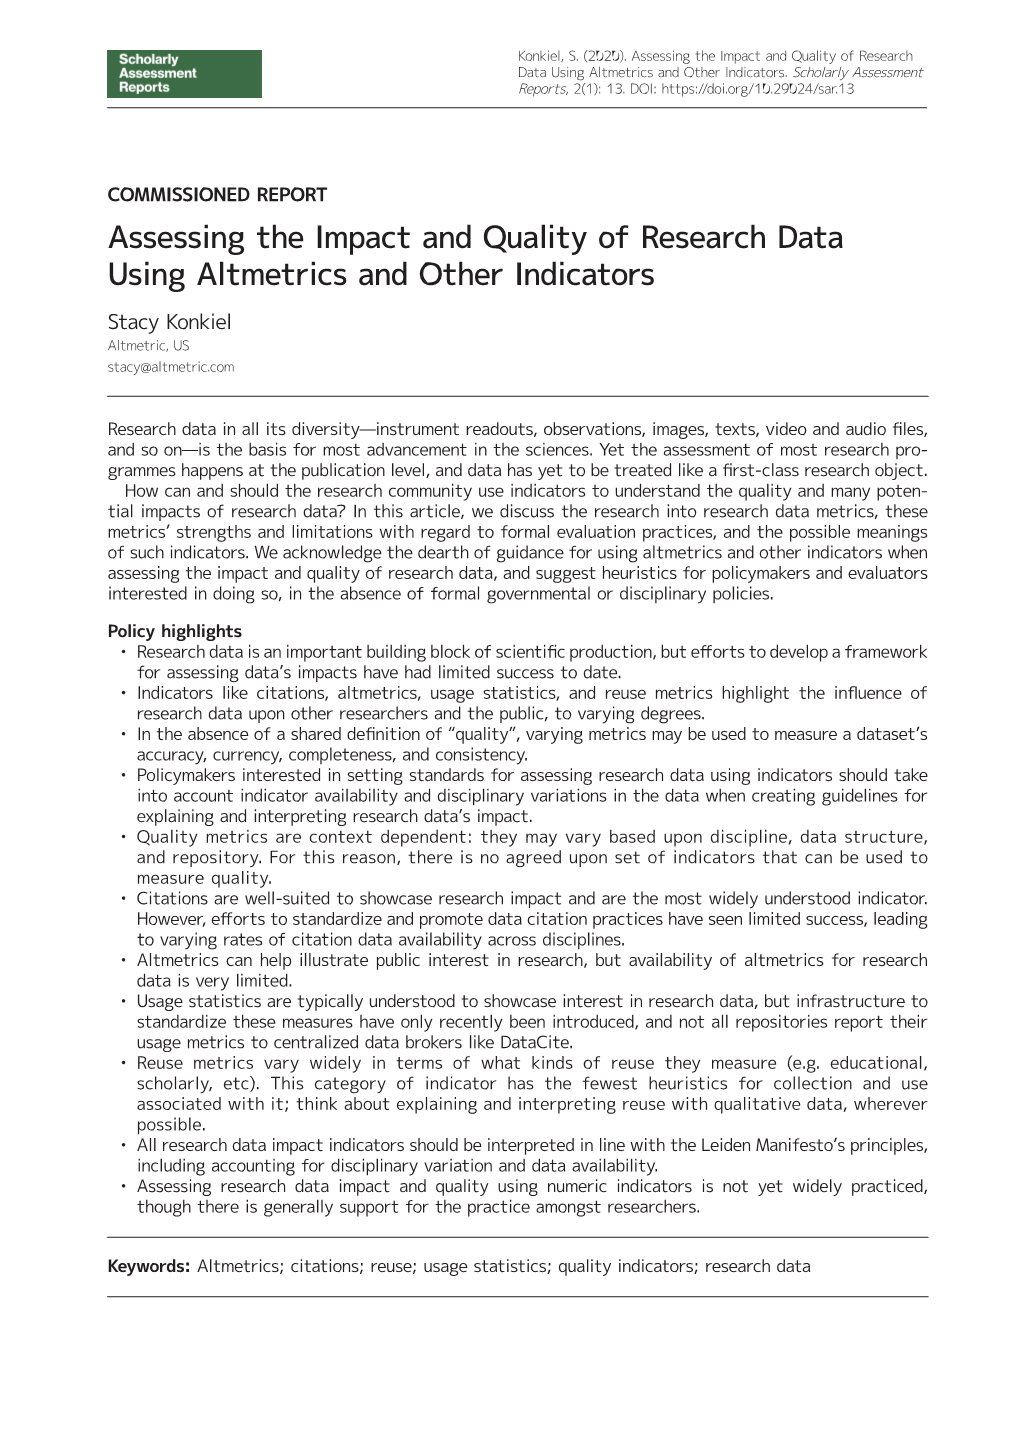 Assessing the Impact and Quality of Research Data Using Altmetrics and Other Indicators